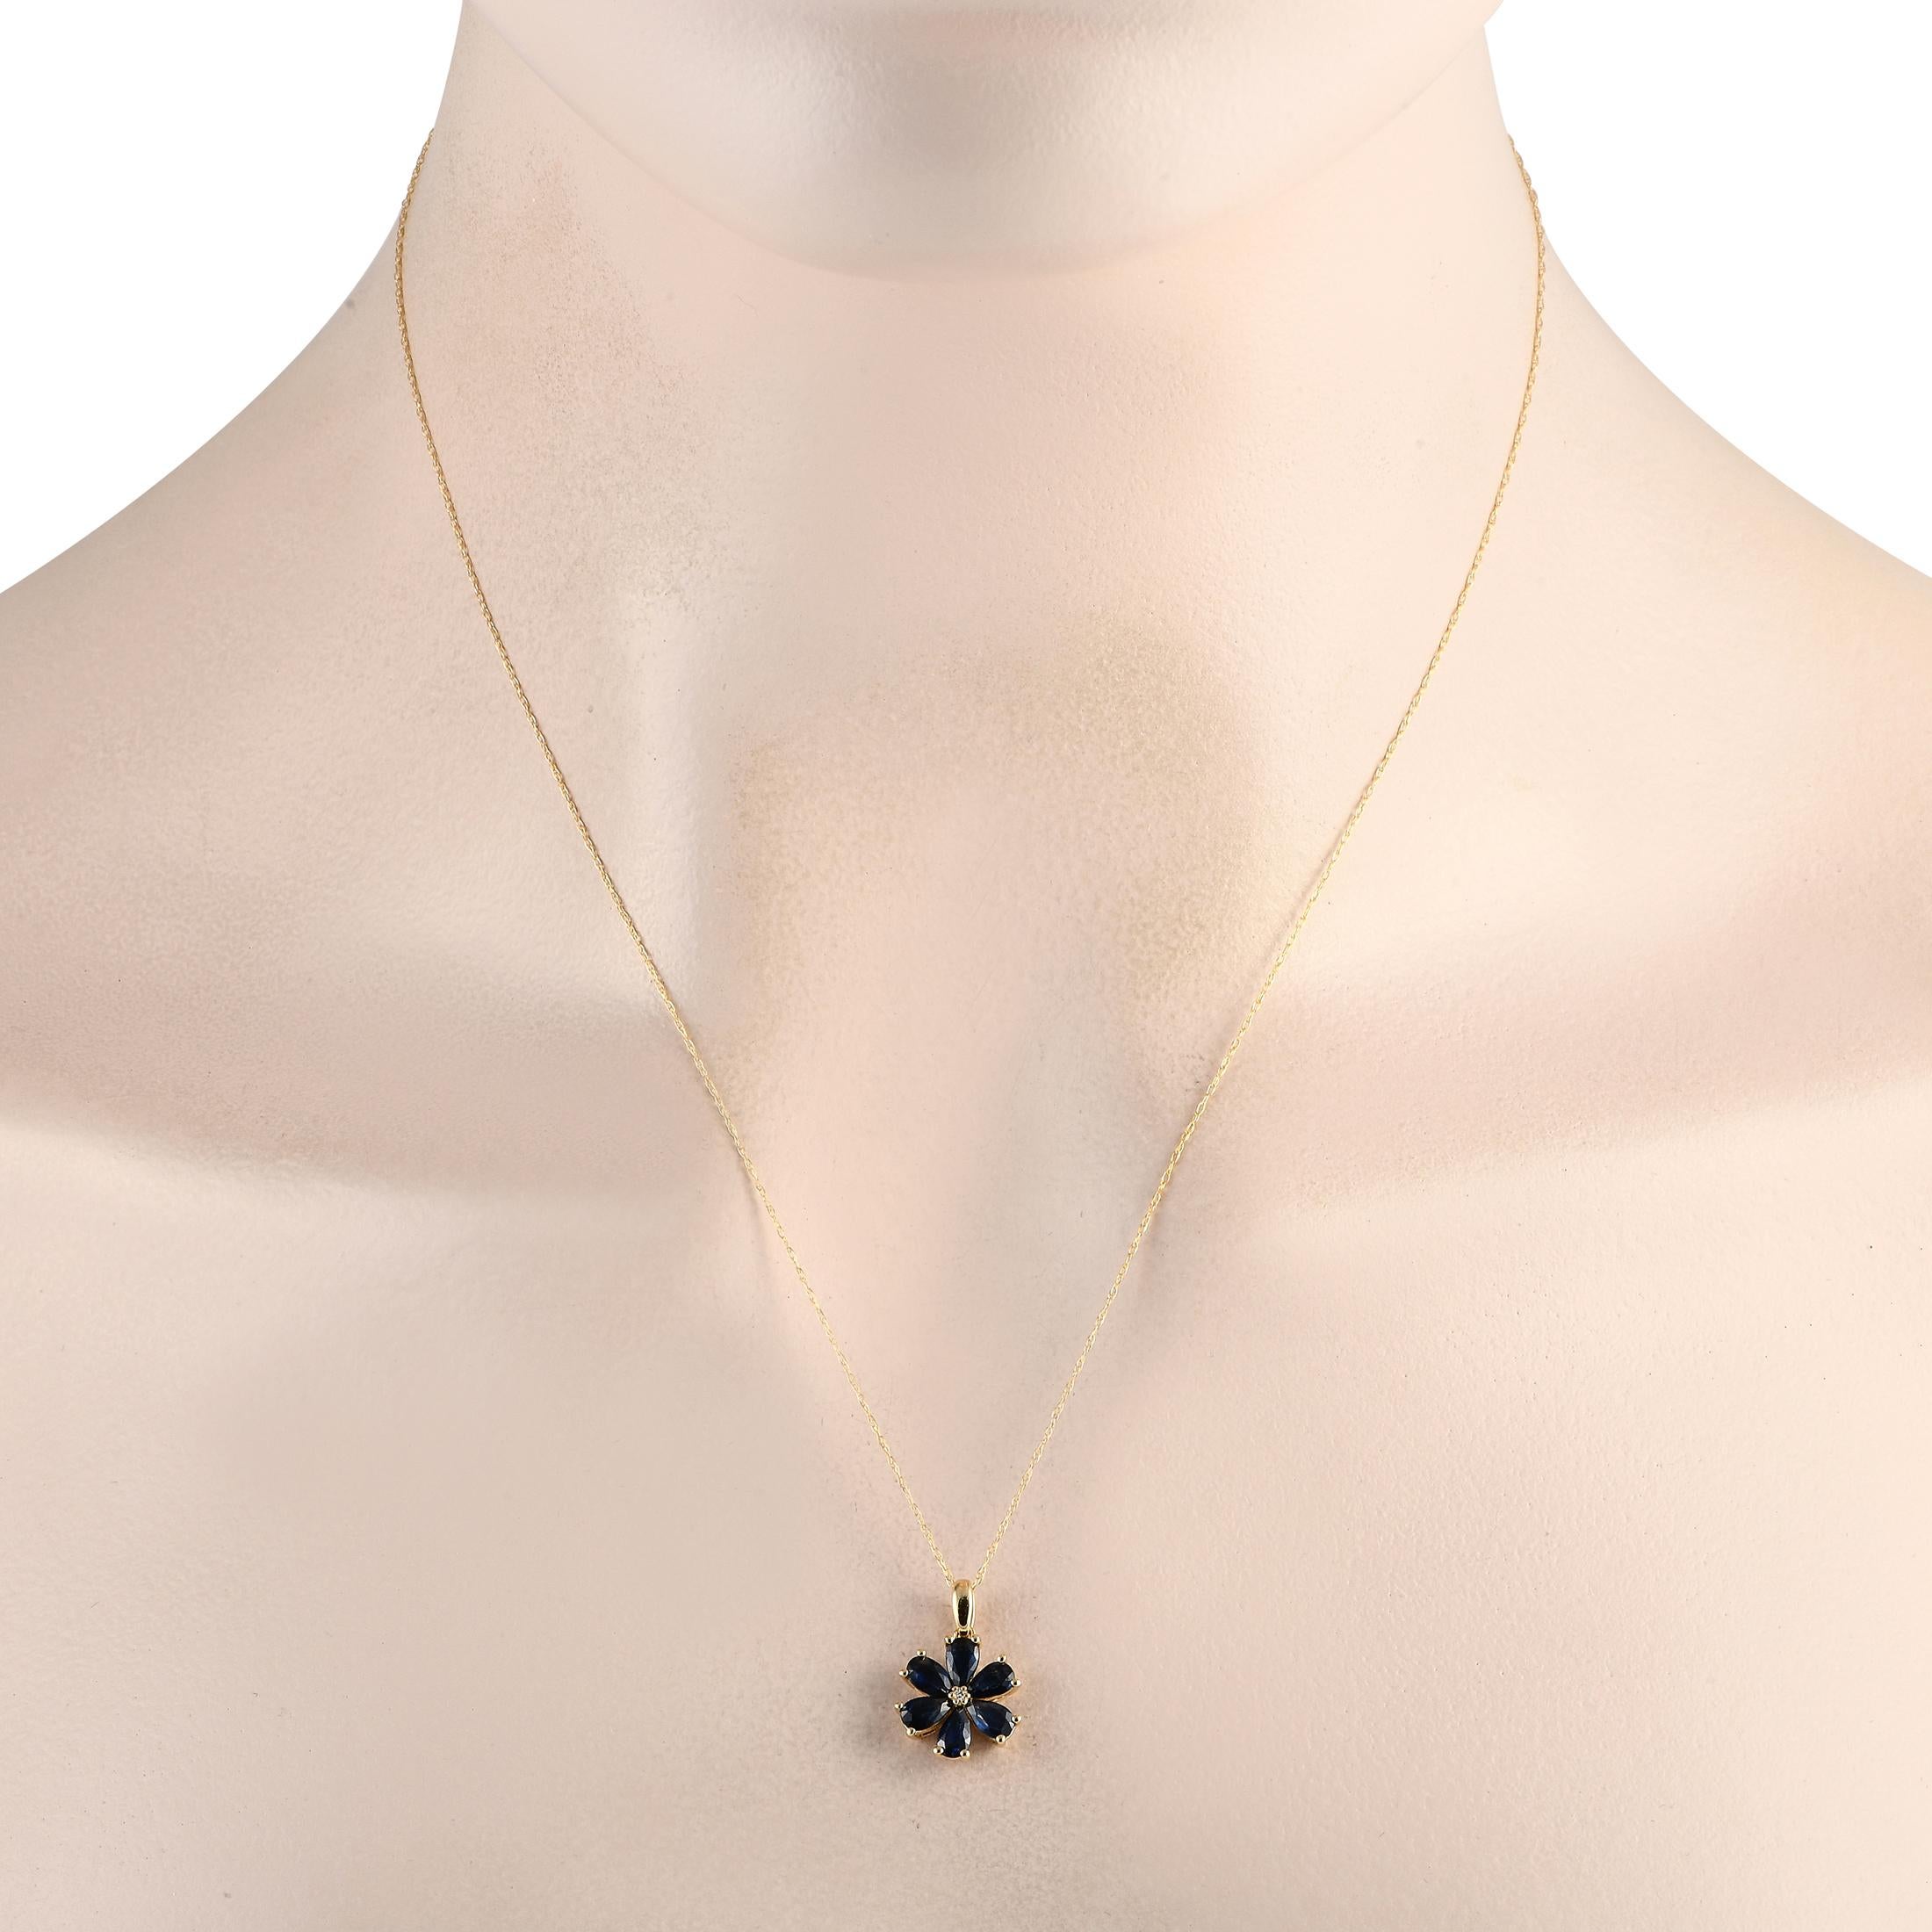 A lovely gift to celebrate one's love for nature. This necklace has a flower-shaped pendant decorated with a diamond center and six sapphire petals. The subtle elegance of this piece makes it suitable for daily wear. The necklace chain measures 18